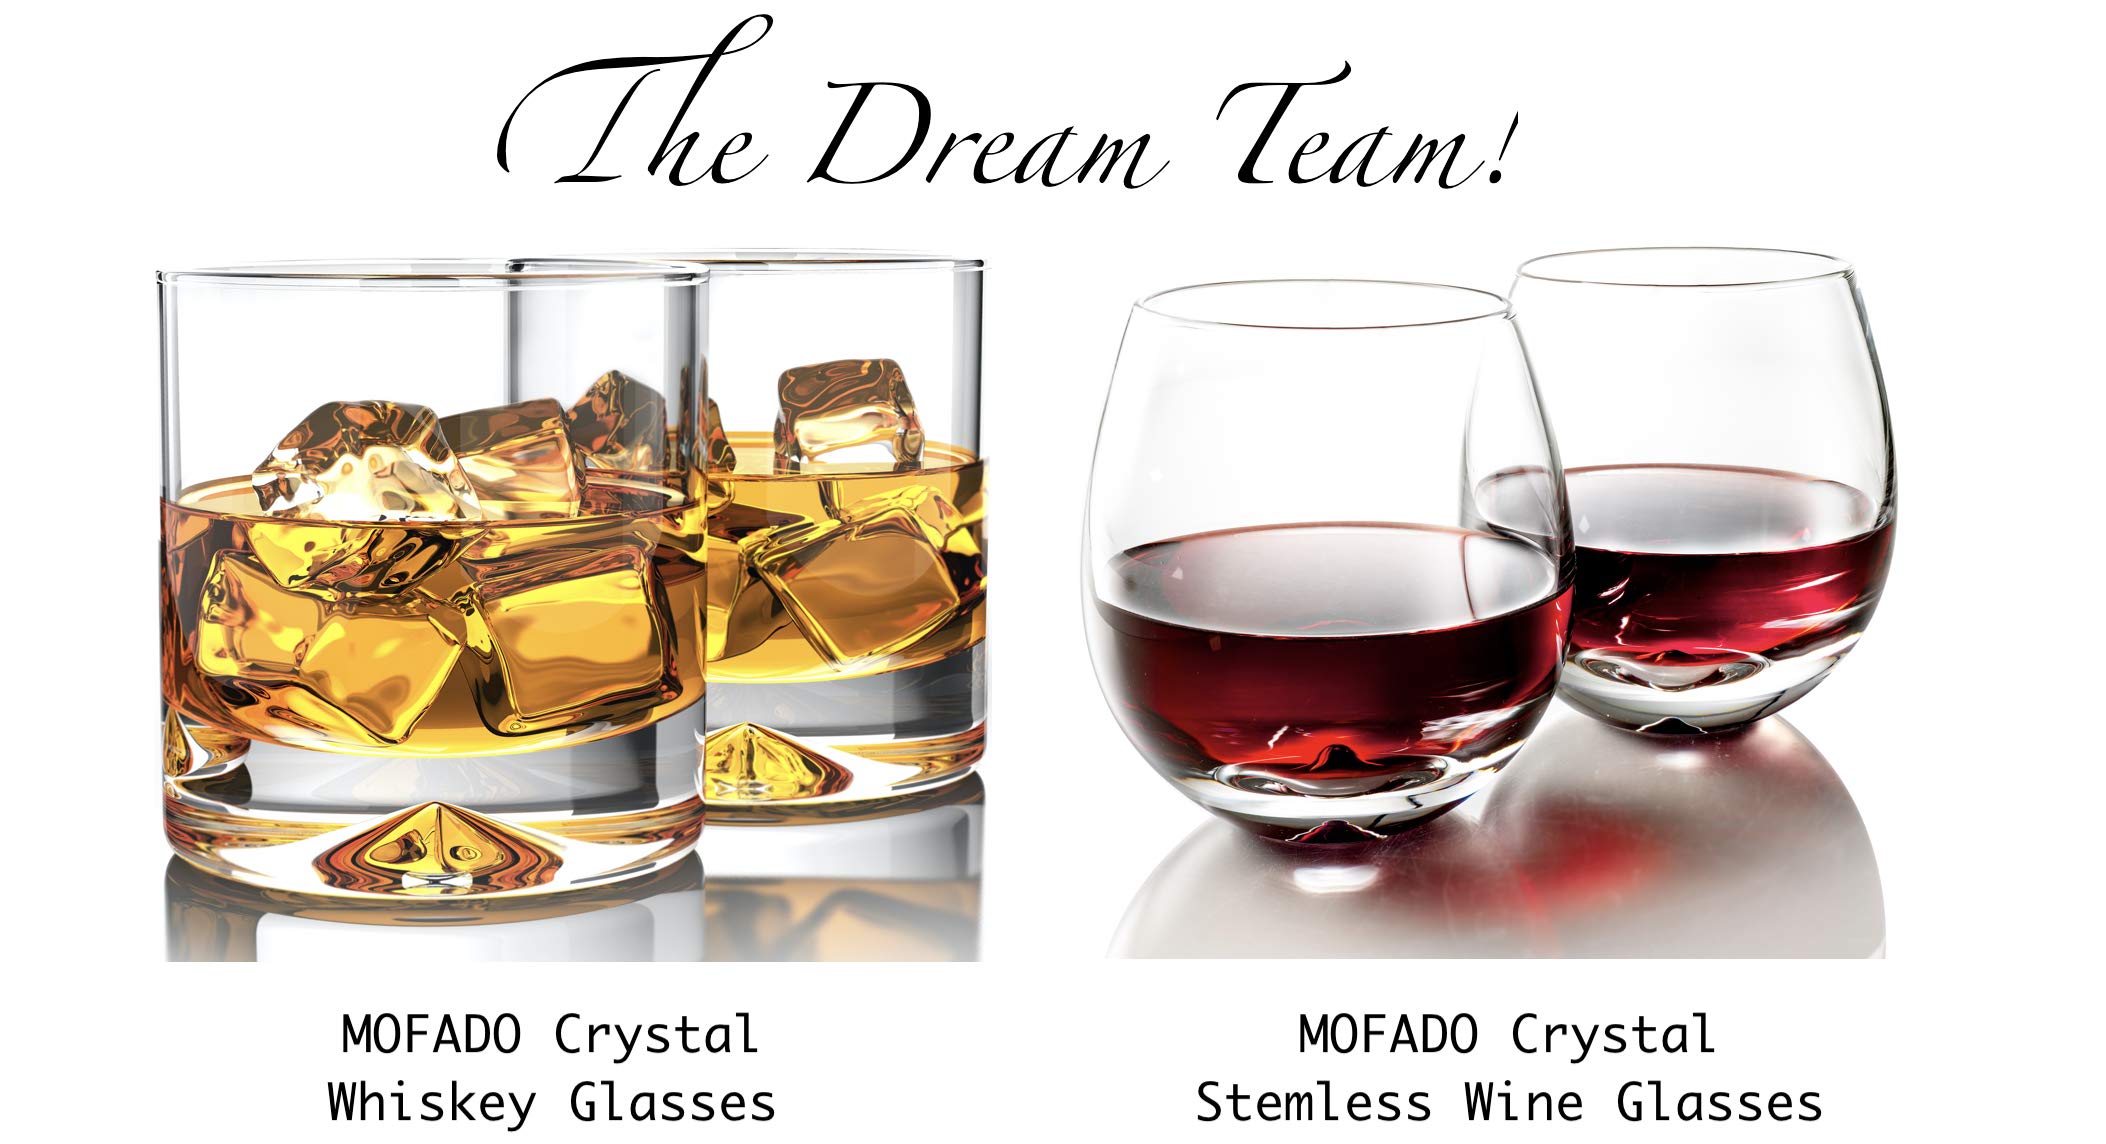 Mofado Crystal Stemless Wine Glasses in a Gift Box - (Set of 4) 15oz - Stable, Sturdy & Durable - For Red and White Wine